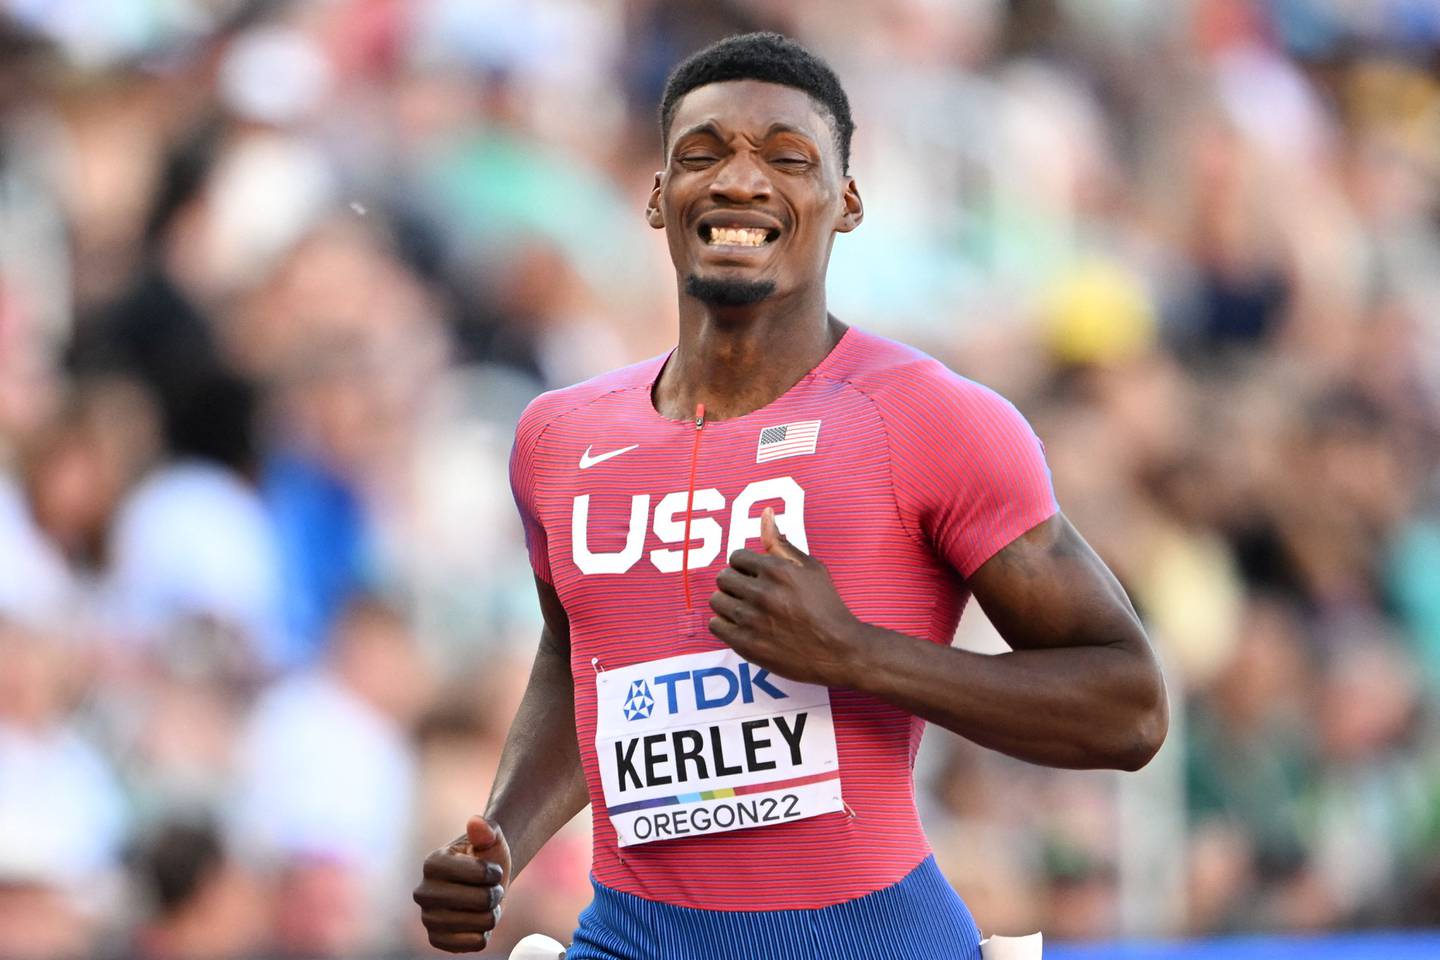 Fred Kerley said he suffered cramp during the 200m semi-final. AFP